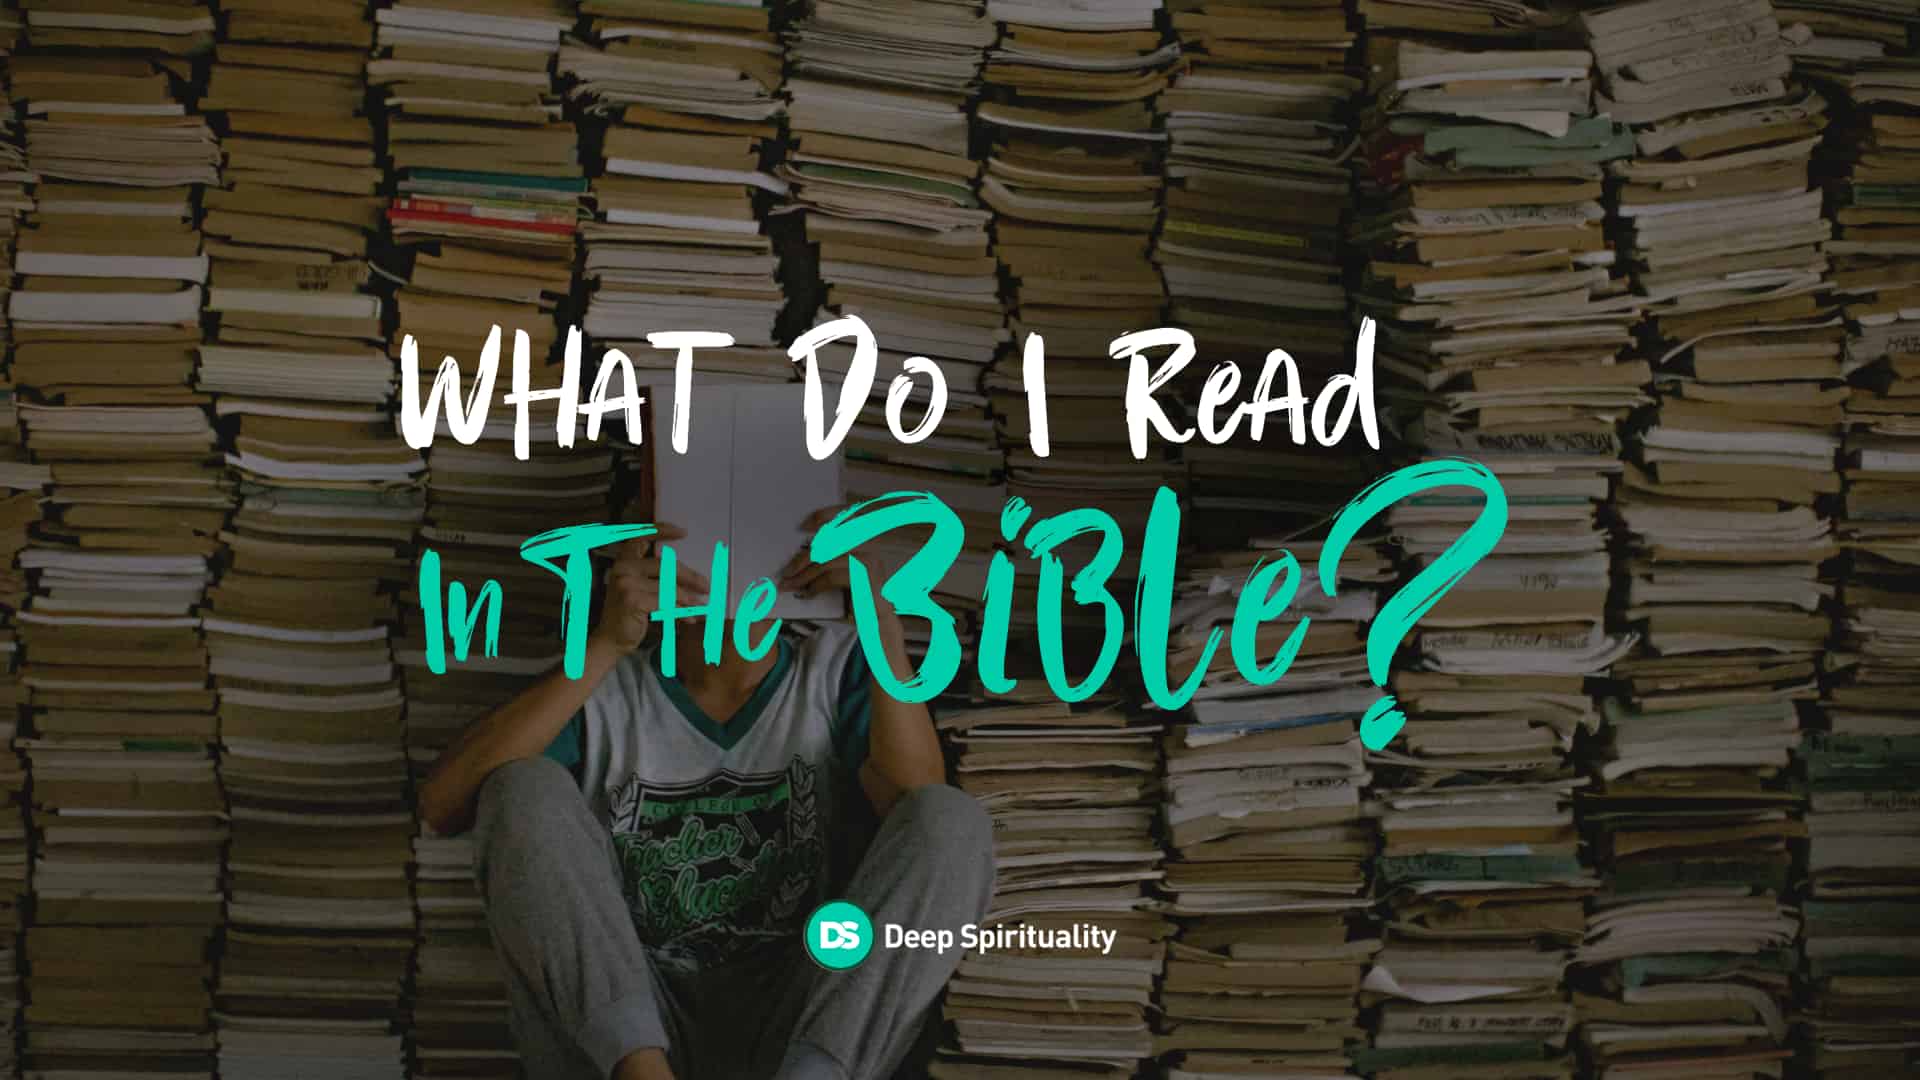 Help! How Do I Know What to Read in the Bible? 8